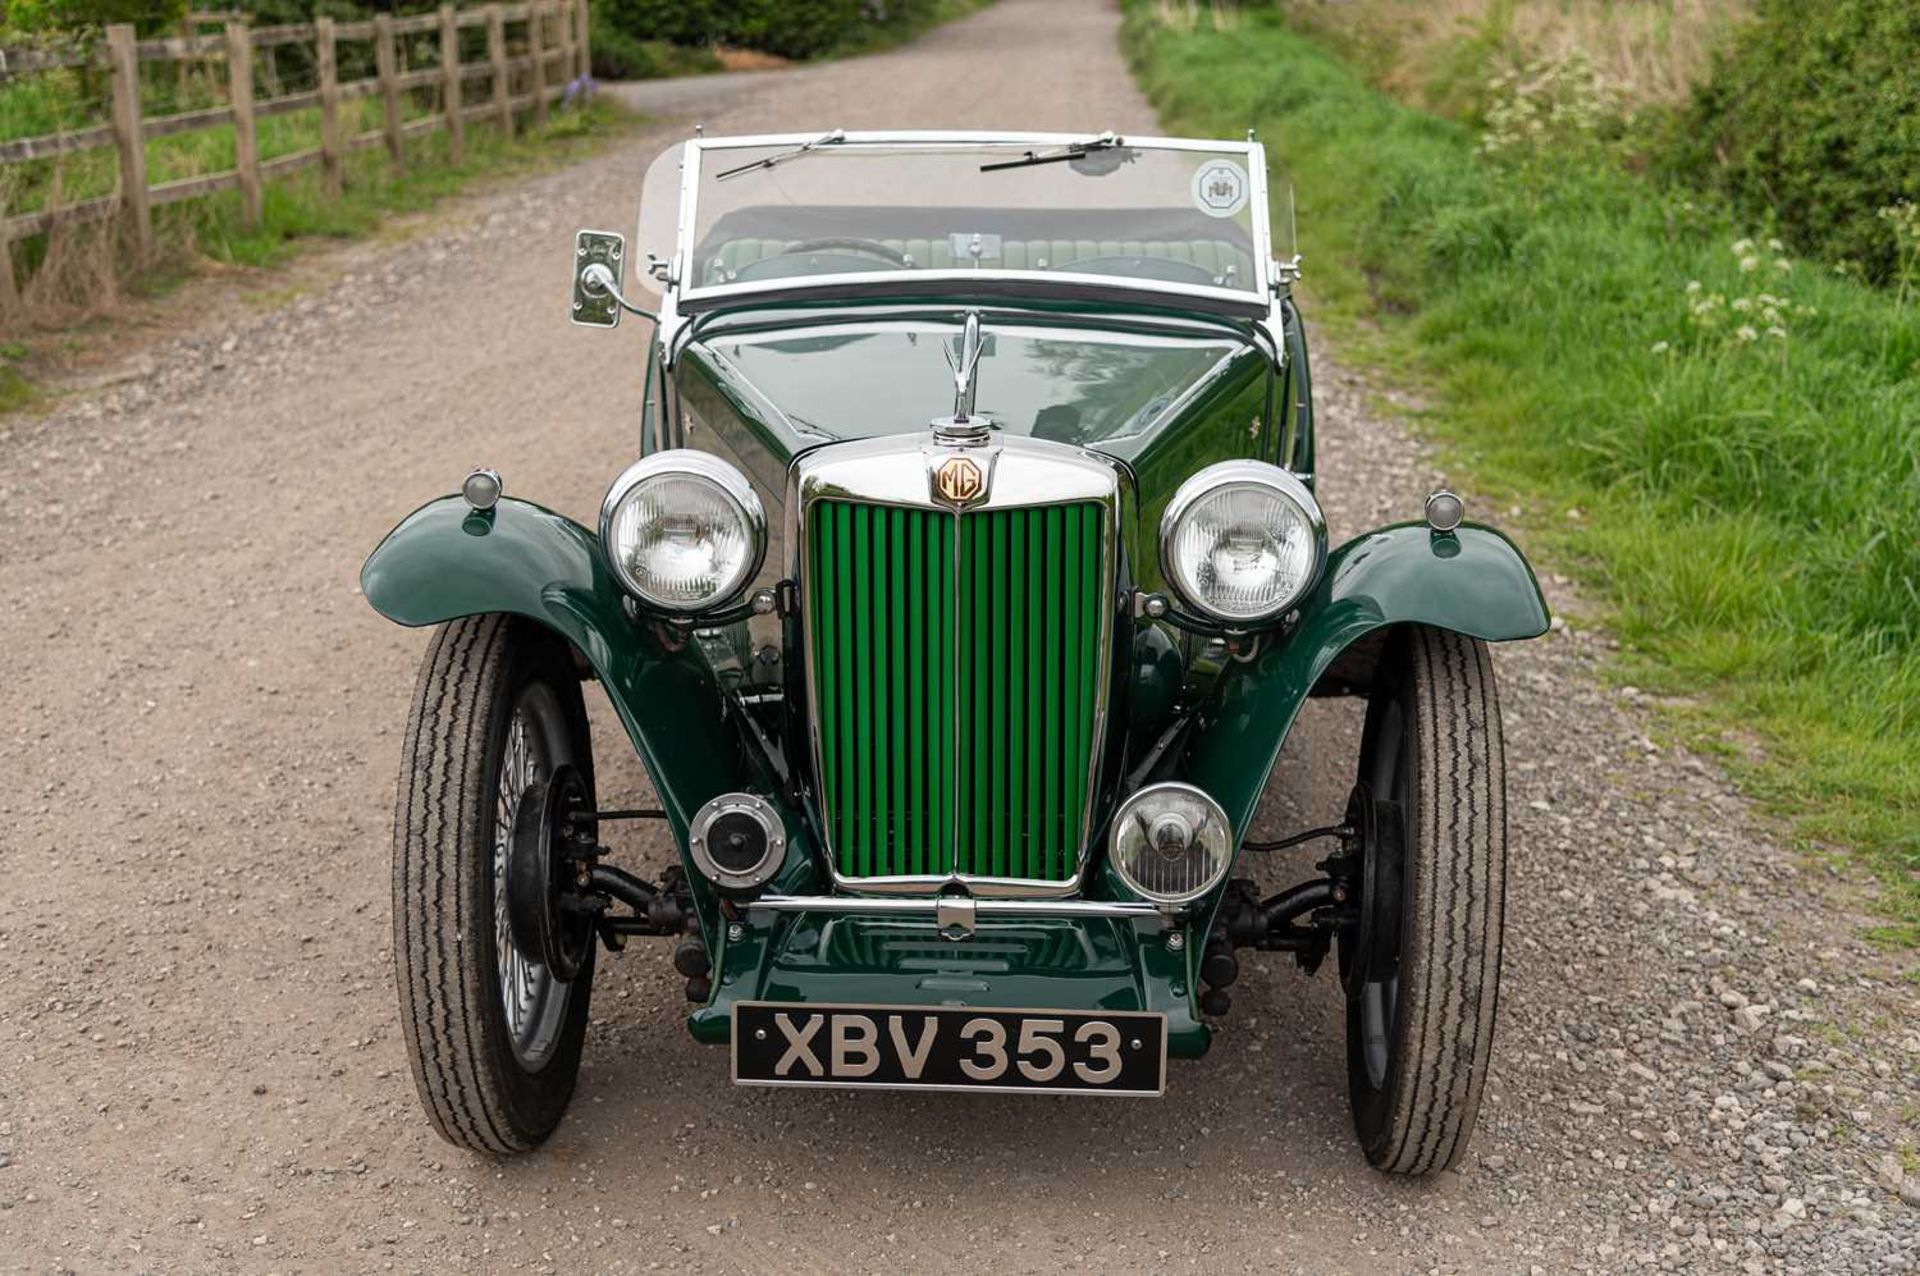 1947 MG TC Midget  Fully restored, right-hand-drive UK home market example - Image 2 of 76